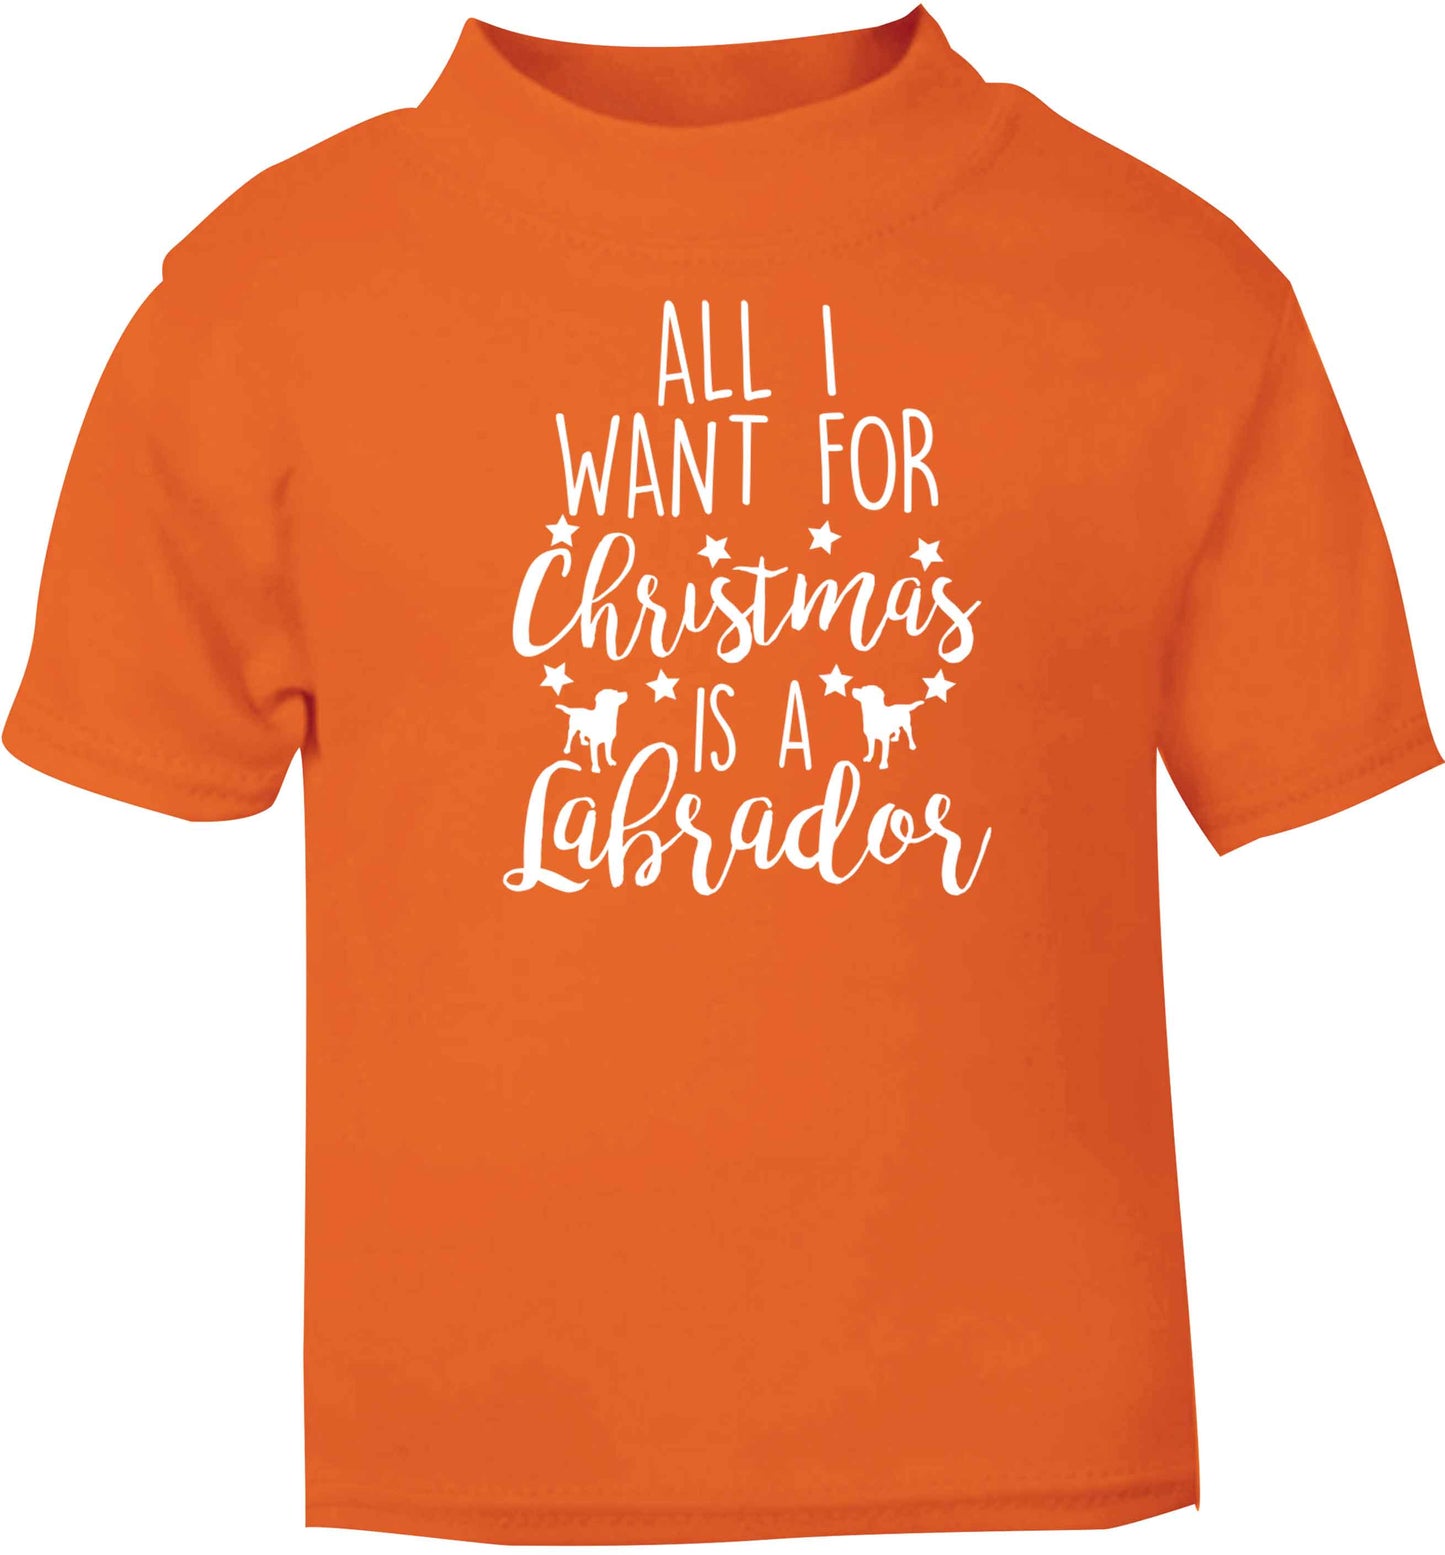 All I want for Christmas is a labrador orange baby toddler Tshirt 2 Years